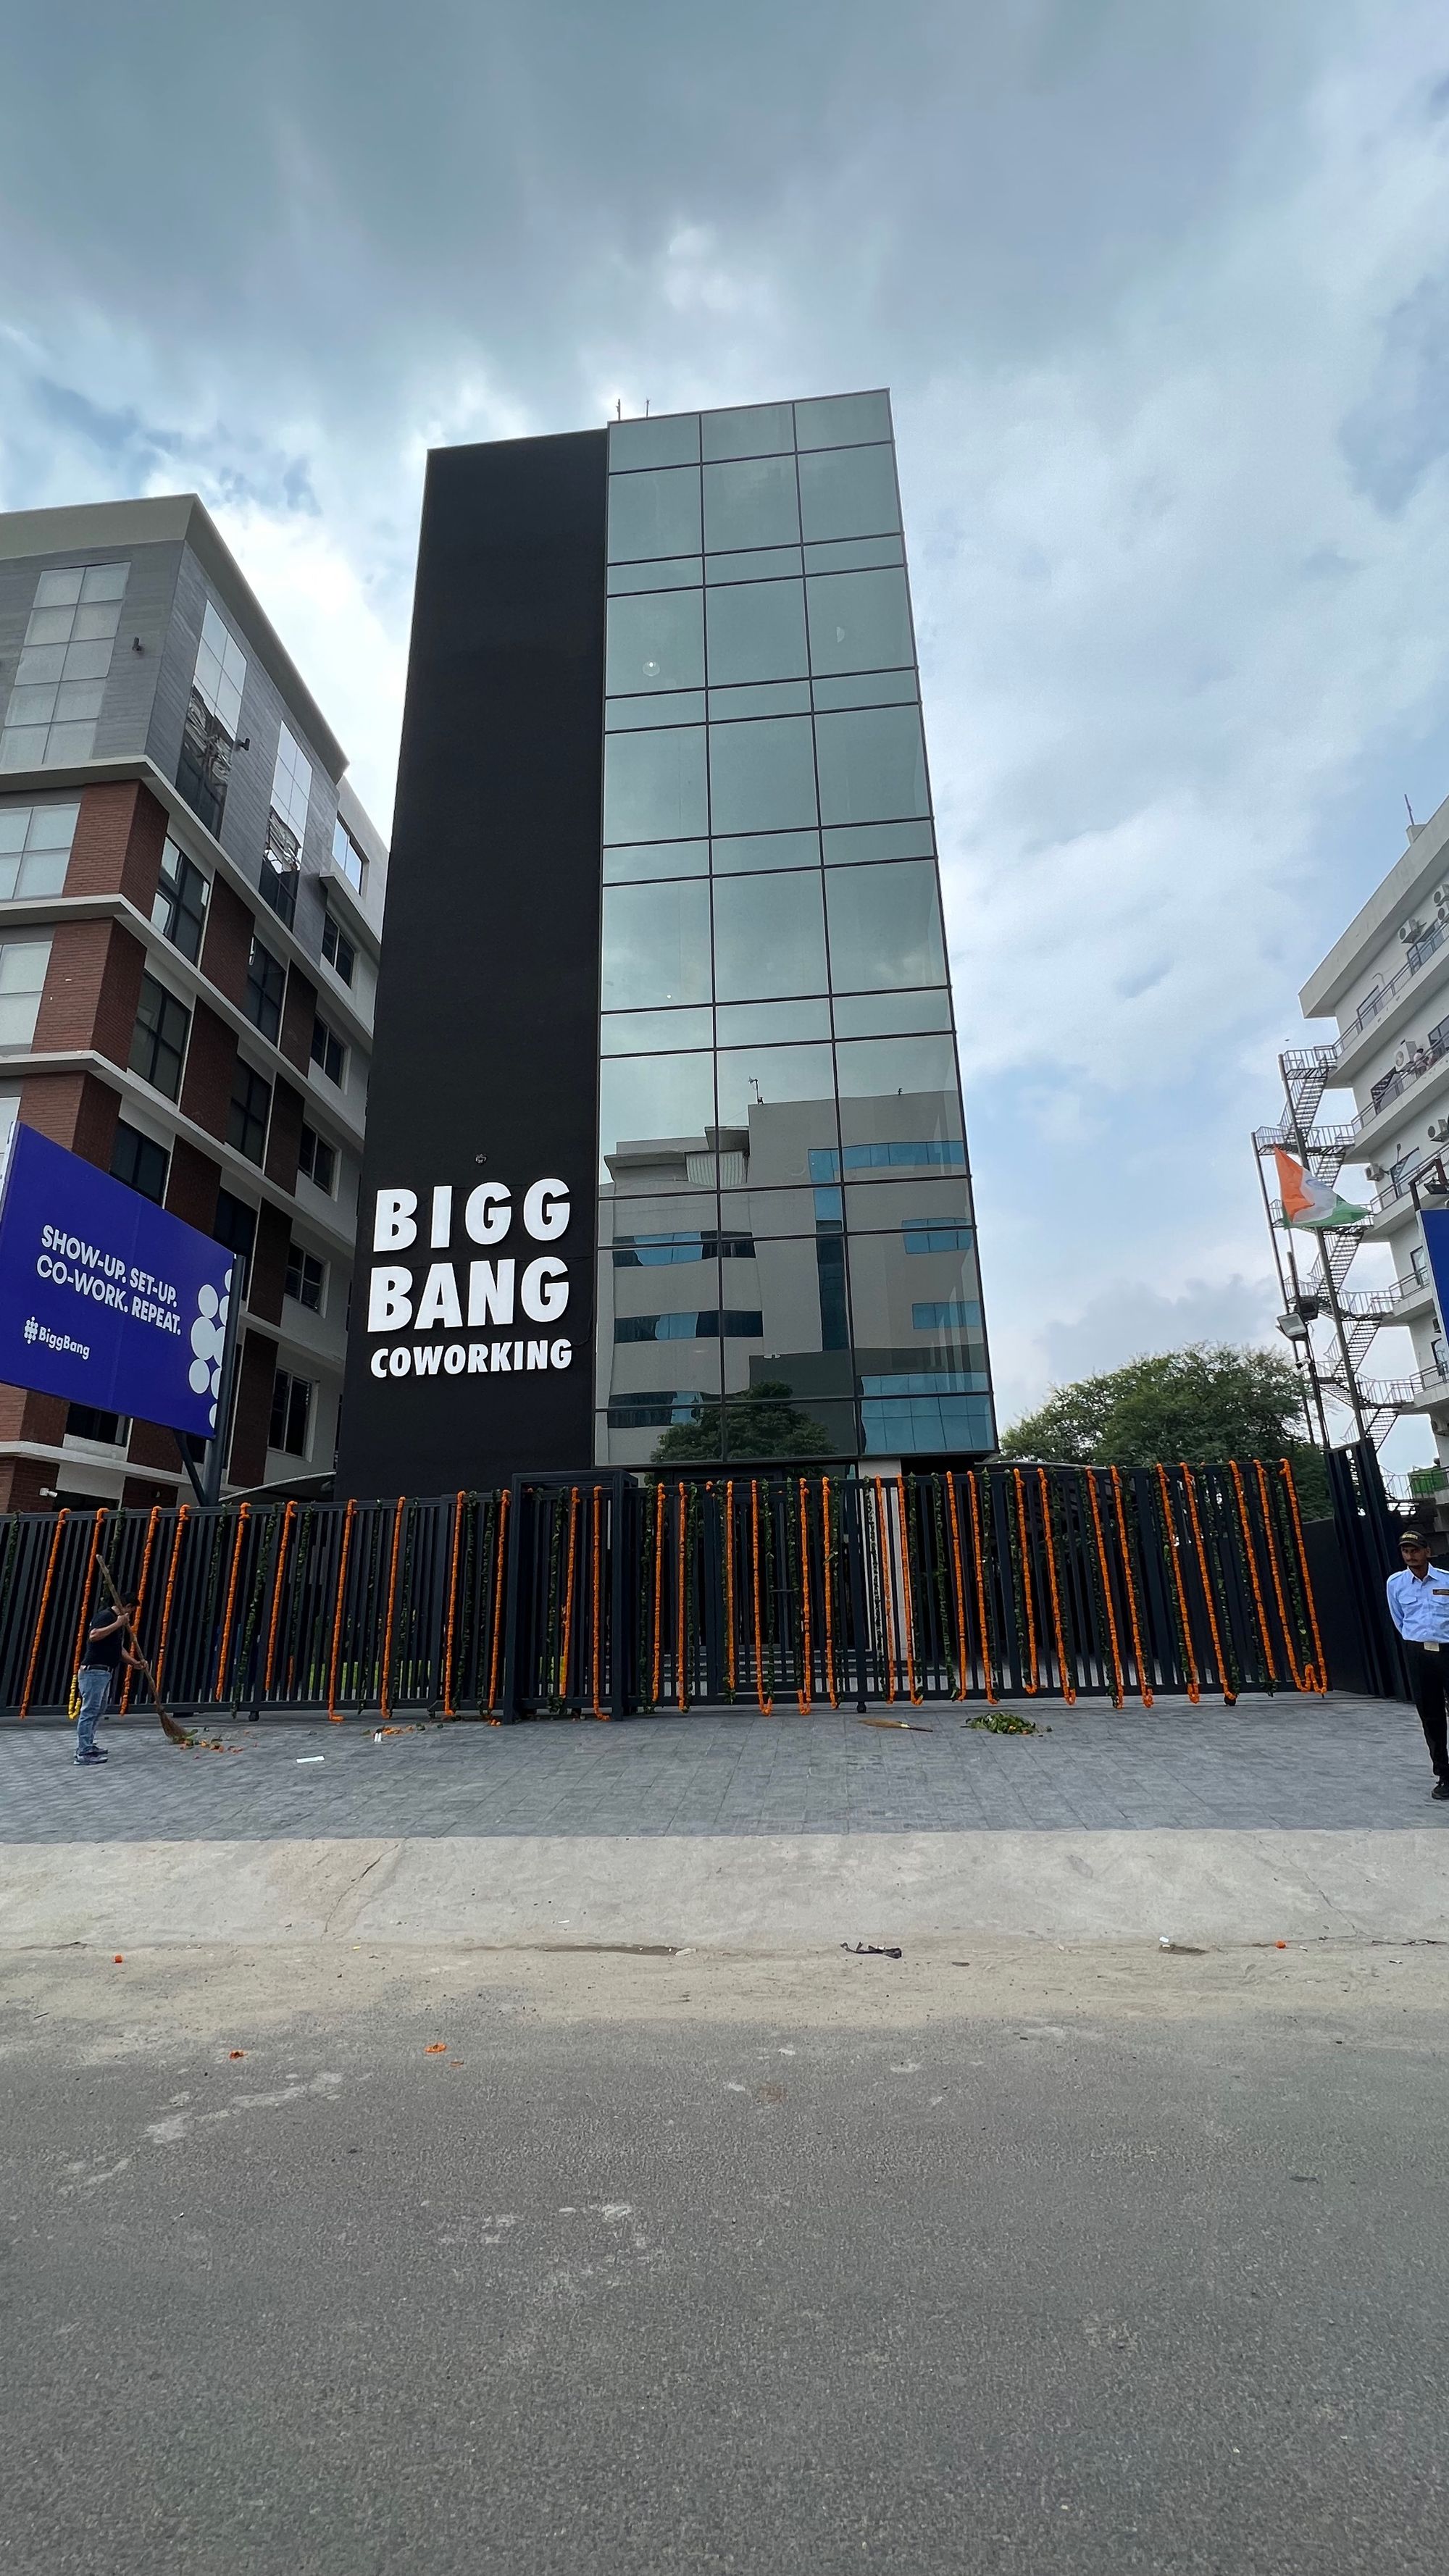 Looking for office space in Mohali? BiggBang Coworking is the best match, and here's why!